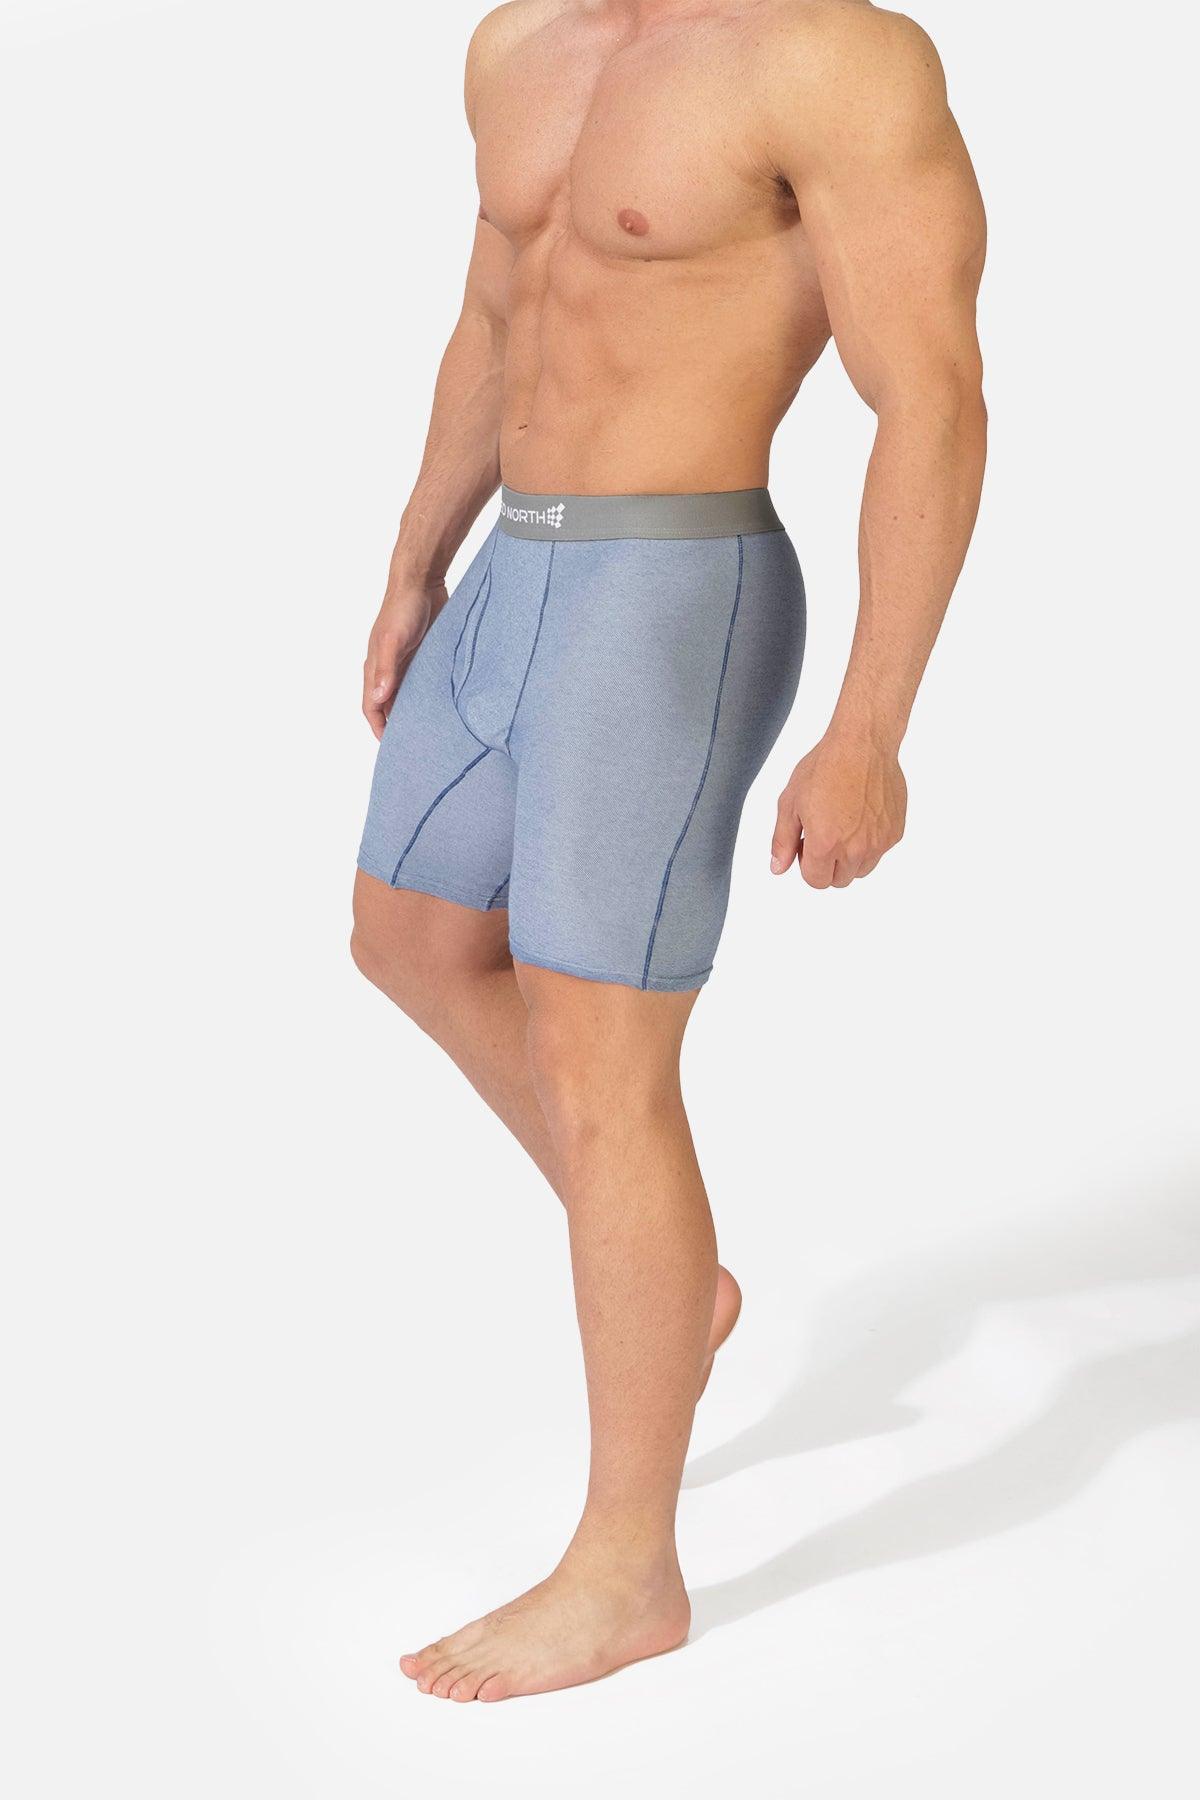 The North Face Underwear for Men